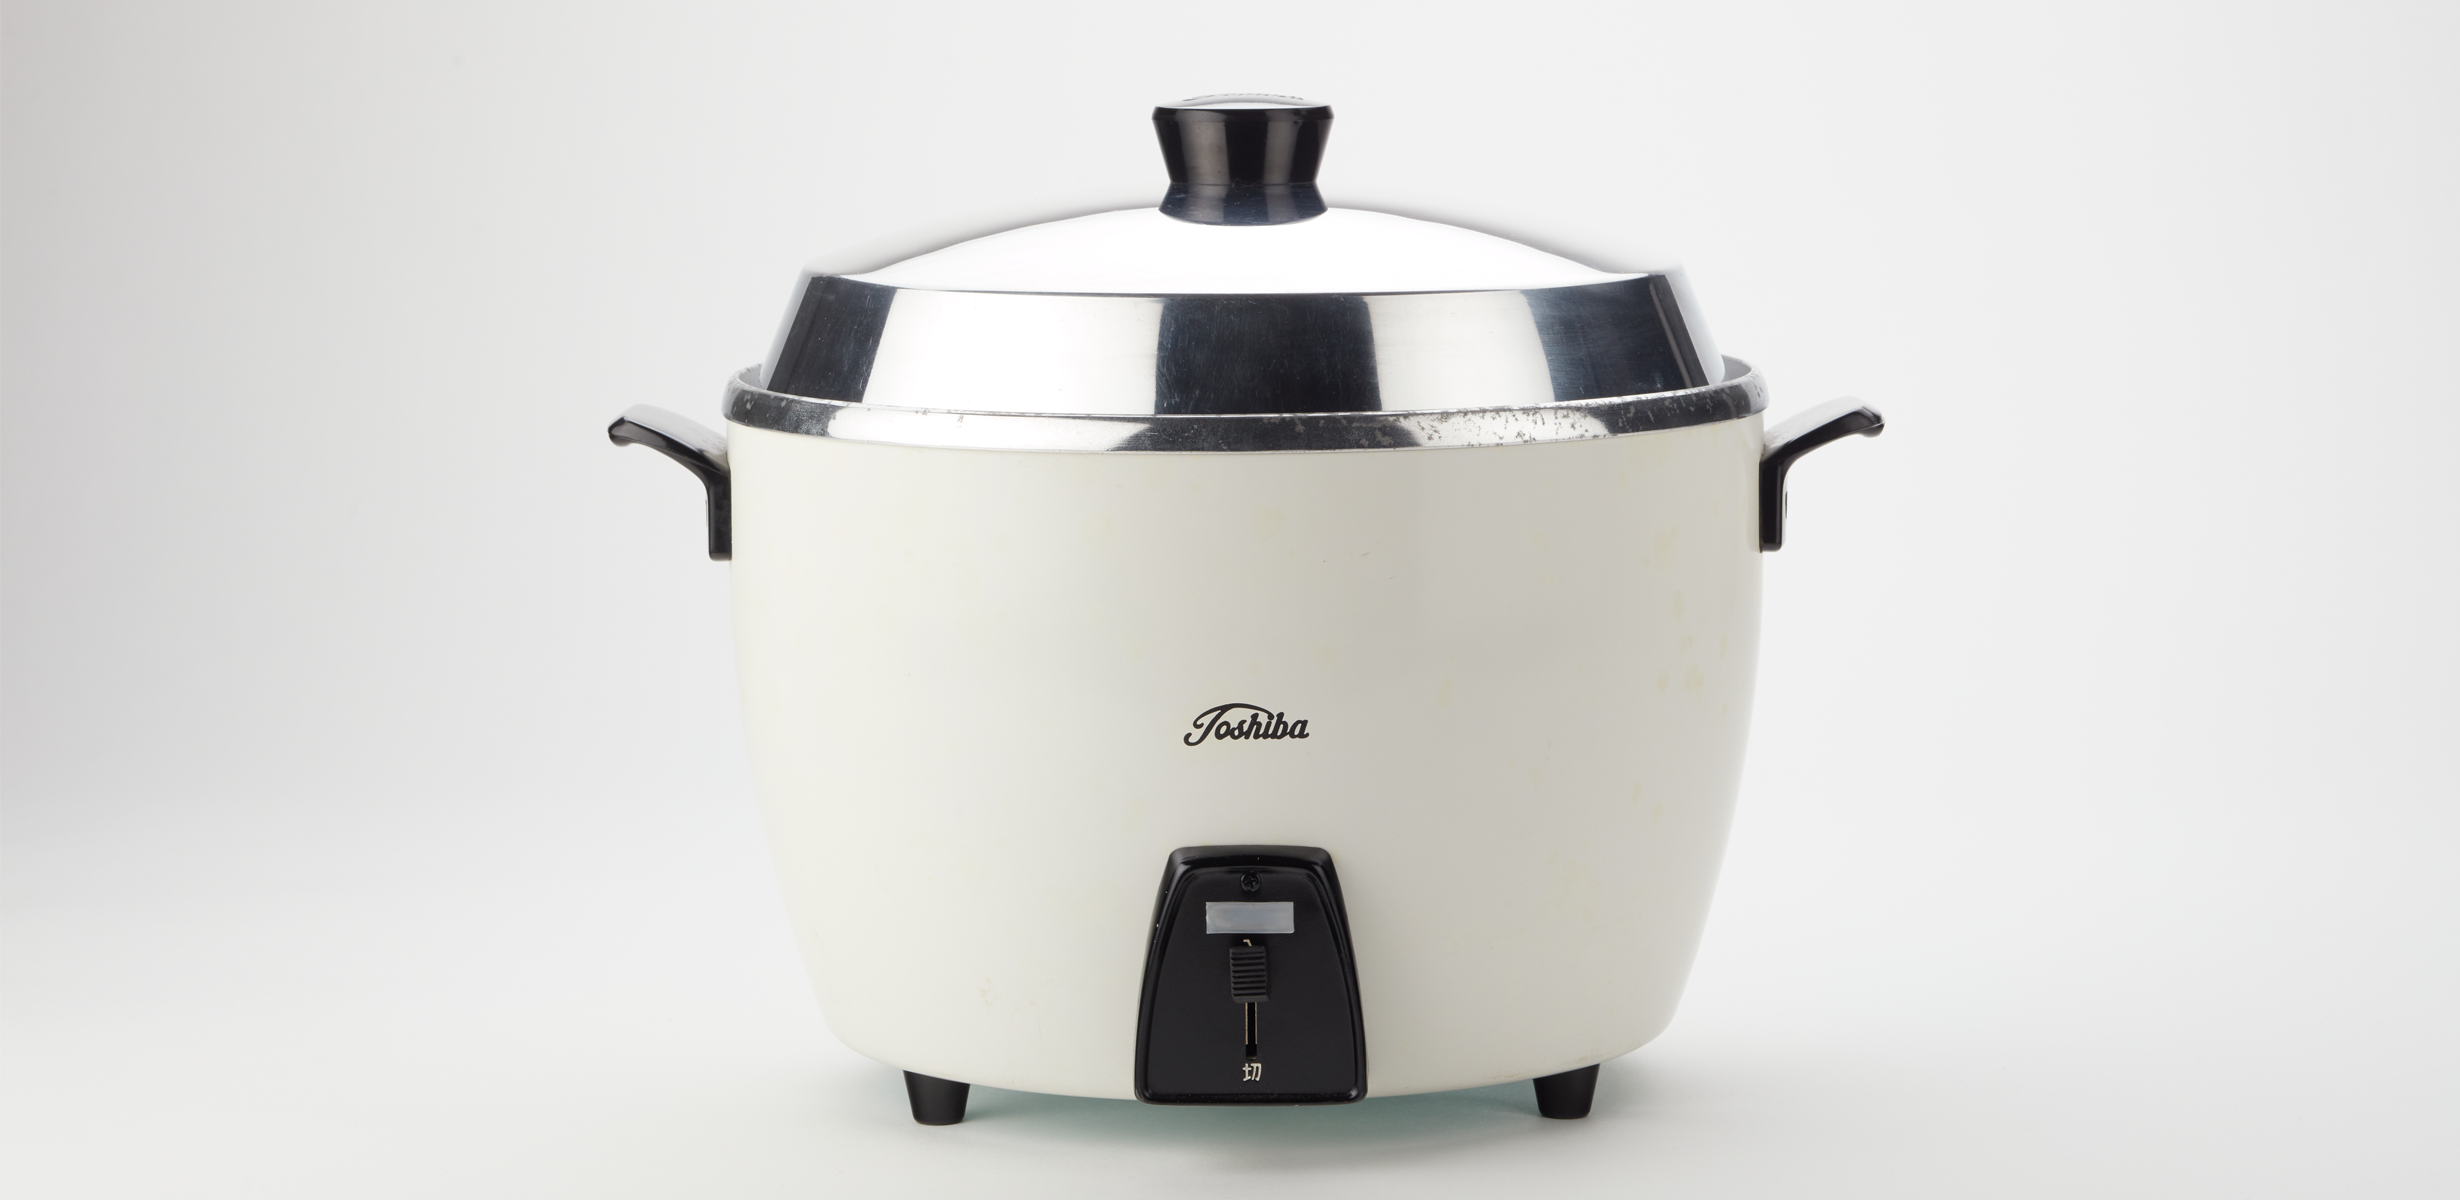 Work of the Week: Toshiba Rice Cooker - ArtReview